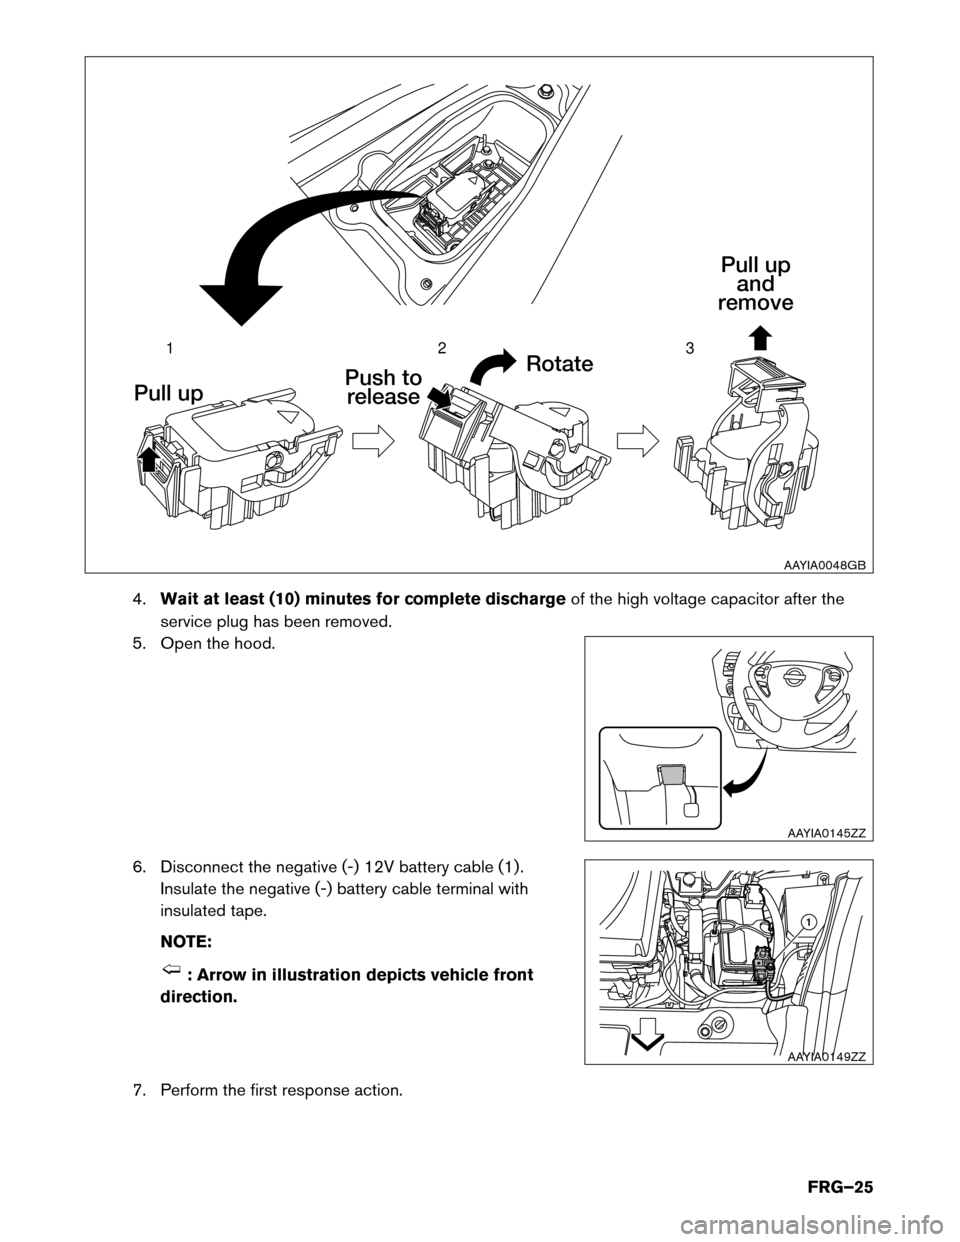 NISSAN LEAF 2015 1.G First Responders Guide 4.
Waitat least (10) minutes for complete discharge of the high voltage capacitor after the
service plug has been removed.
5. Open the hood.
6. Disconnect the negative (-) 12V battery cable (1) . Insu